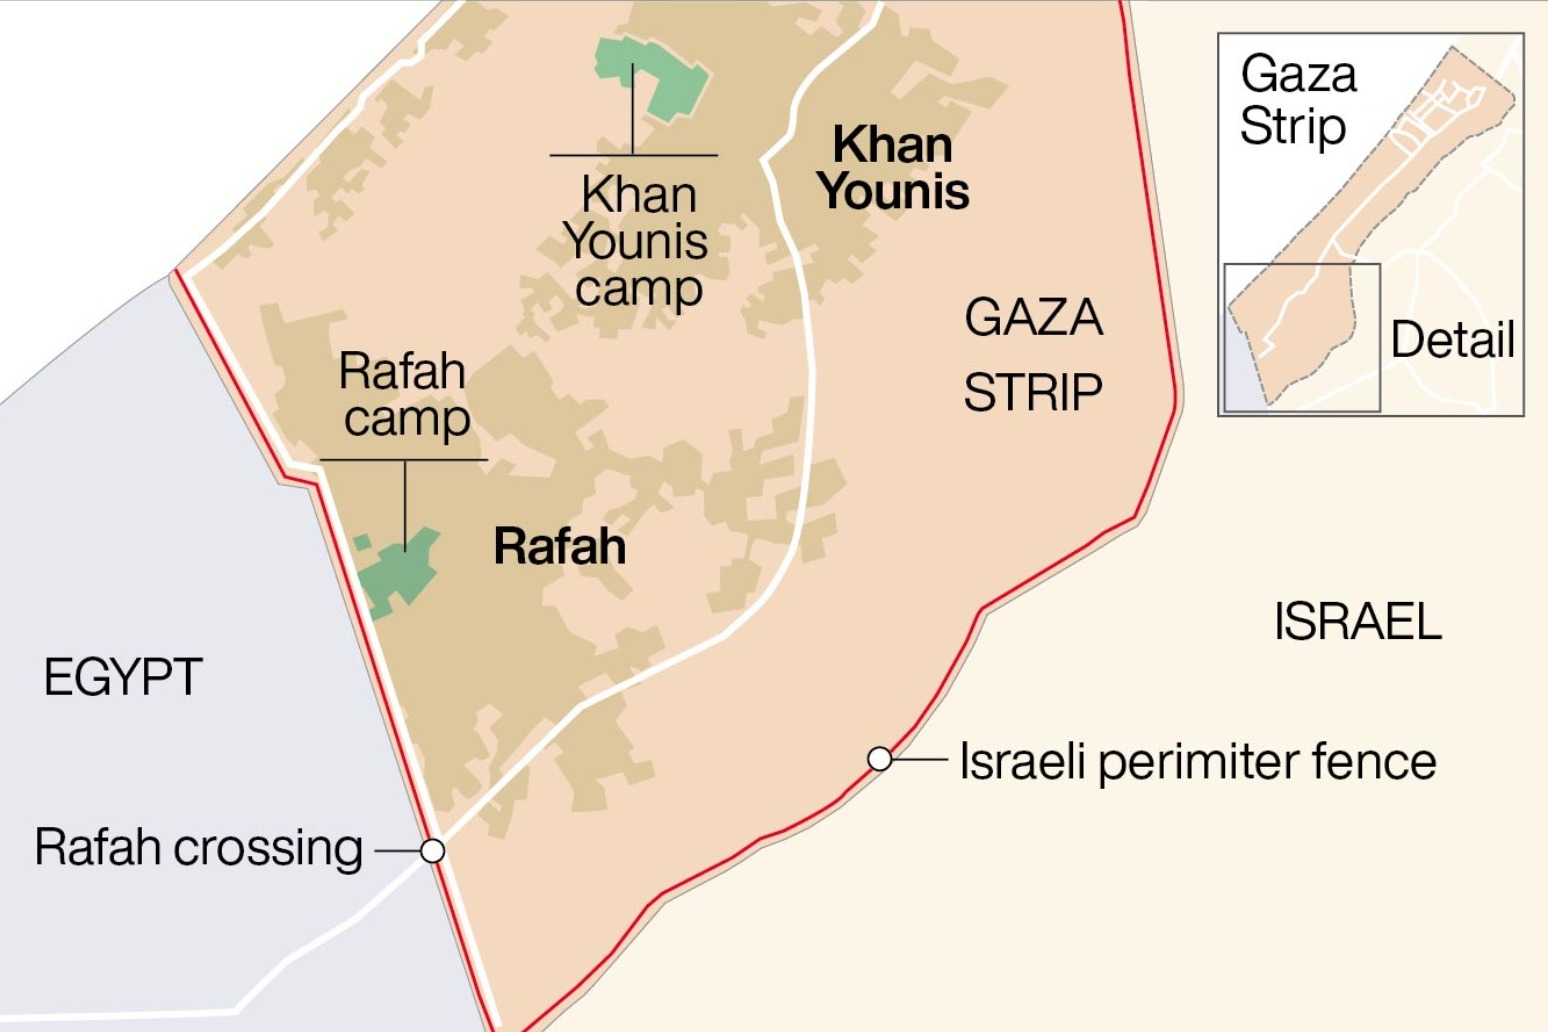 UN: Israel prevented access to Rafah crossing